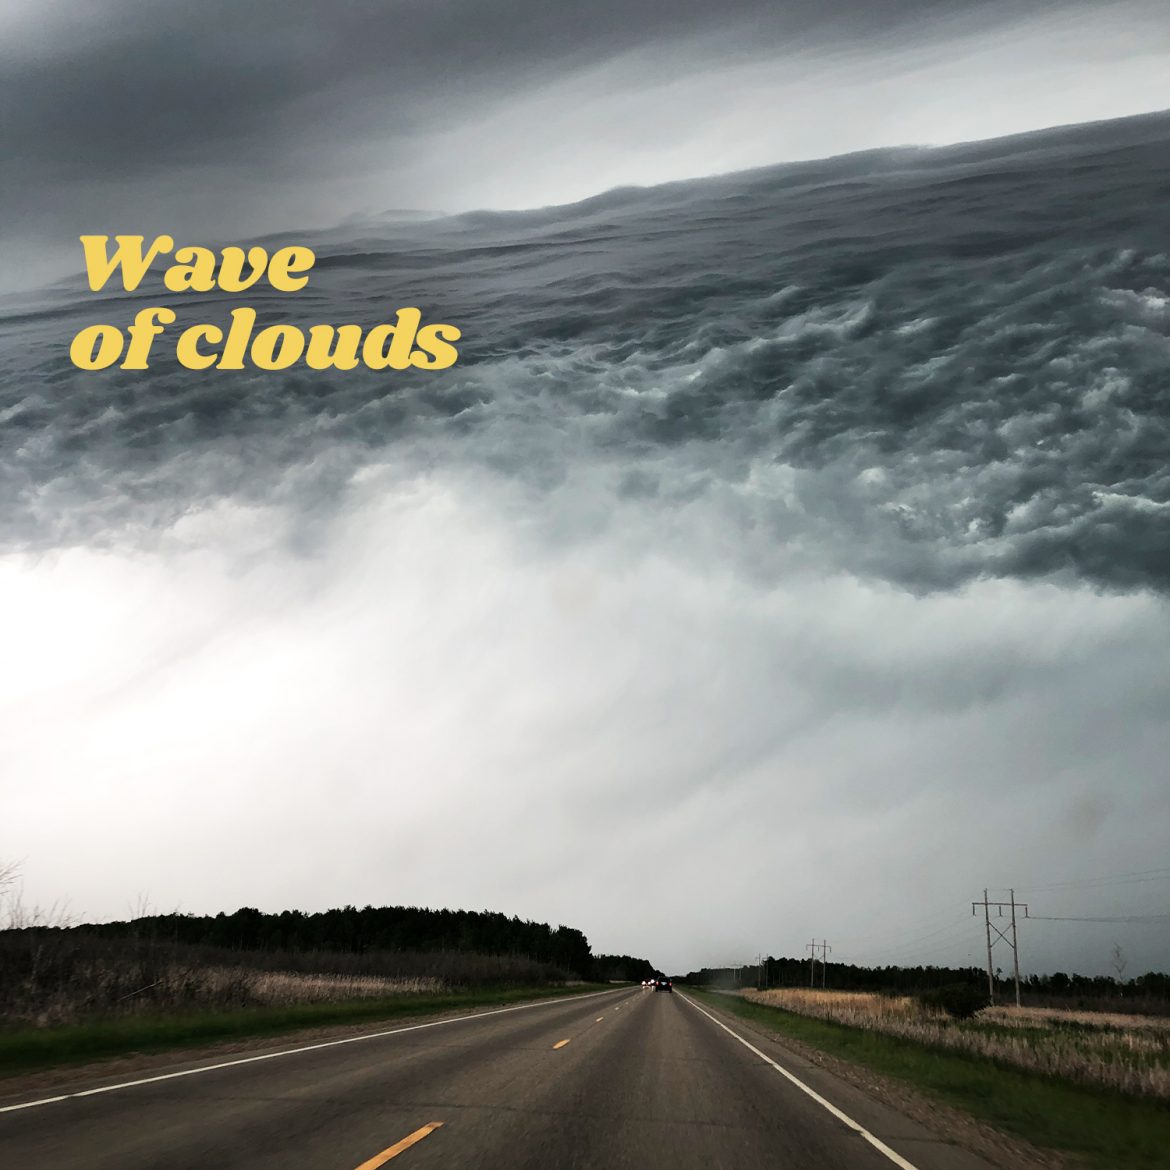 Wave of clouds